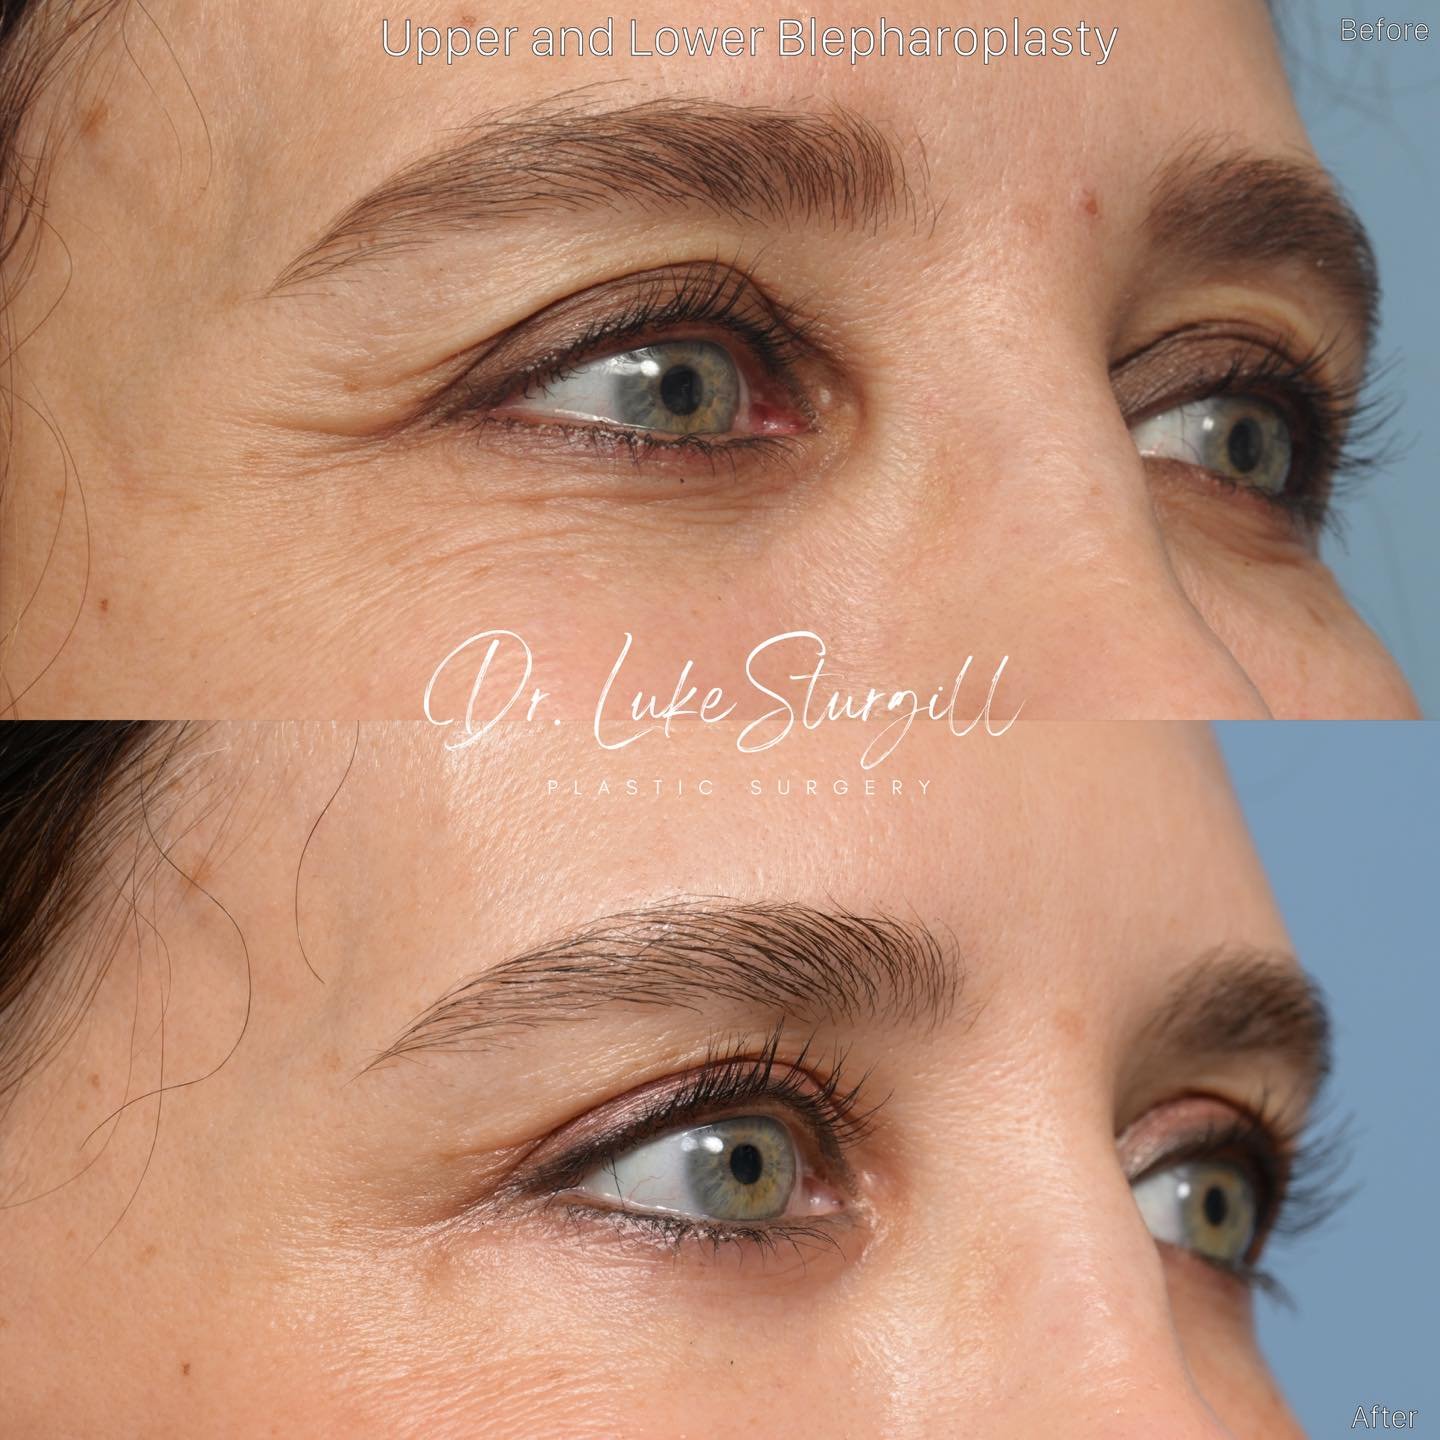 Solving the Puzzle of Eyelid Skin

The subtleties of lower eyelid skin issues:
* some patients have crepey skin only, and do not need any skin removed. These patient&rsquo;s are best treated with resurfacing techniques (chemical peel (35% TCA or Phen